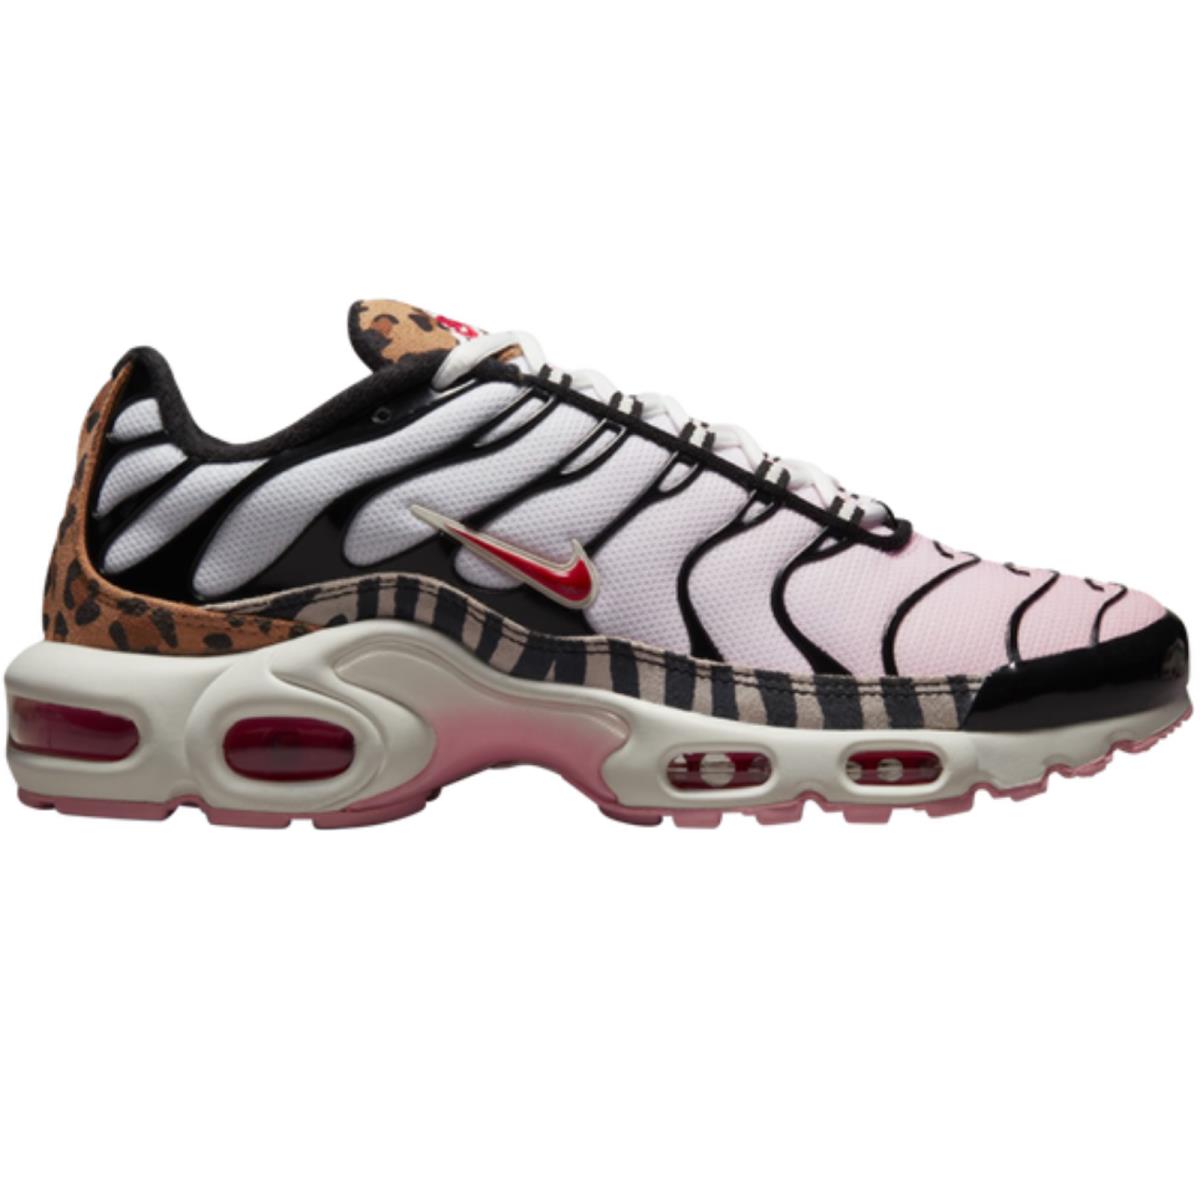 Nike Air Max Plus Women`s Casual Shoes All Colors US Sizes 6-11 Medium Soft Pink/Black/Summit White/University Red